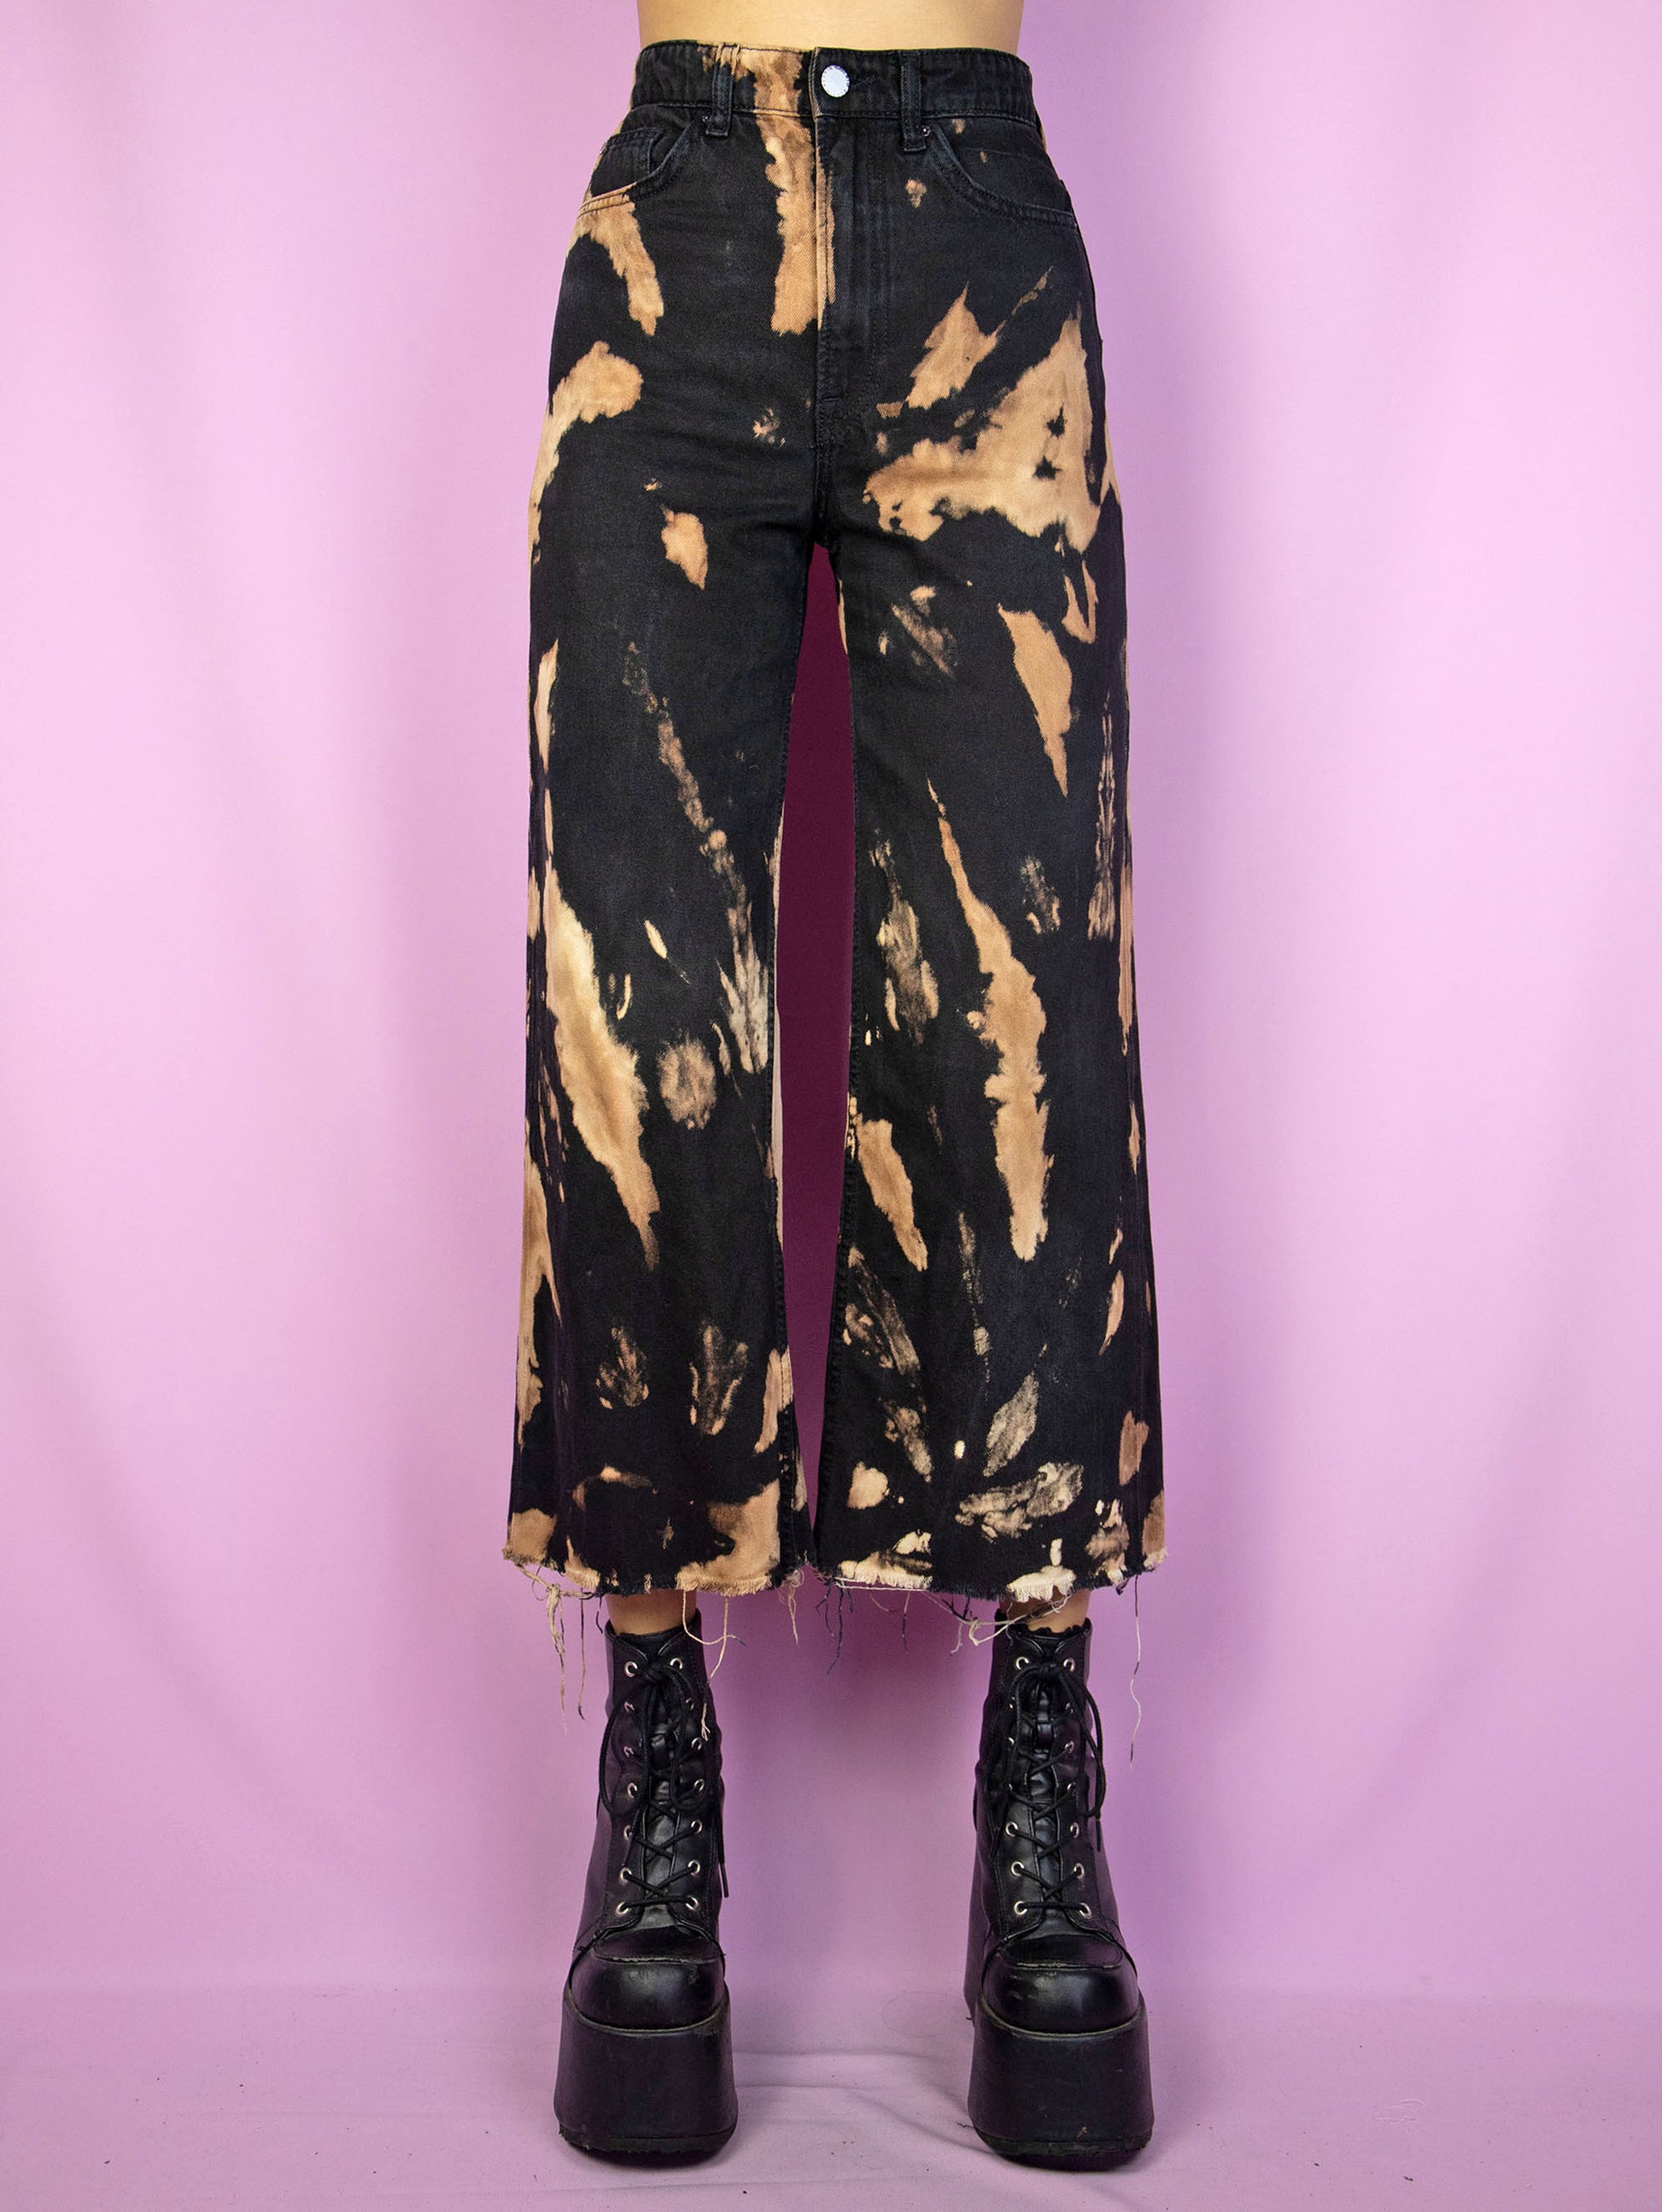 The Y2K Black Tie Dye Jeans are a vintage high waisted black bleached tie dye capri pants with a frayed hem. Cyber goth 2000s wide leg trousers.